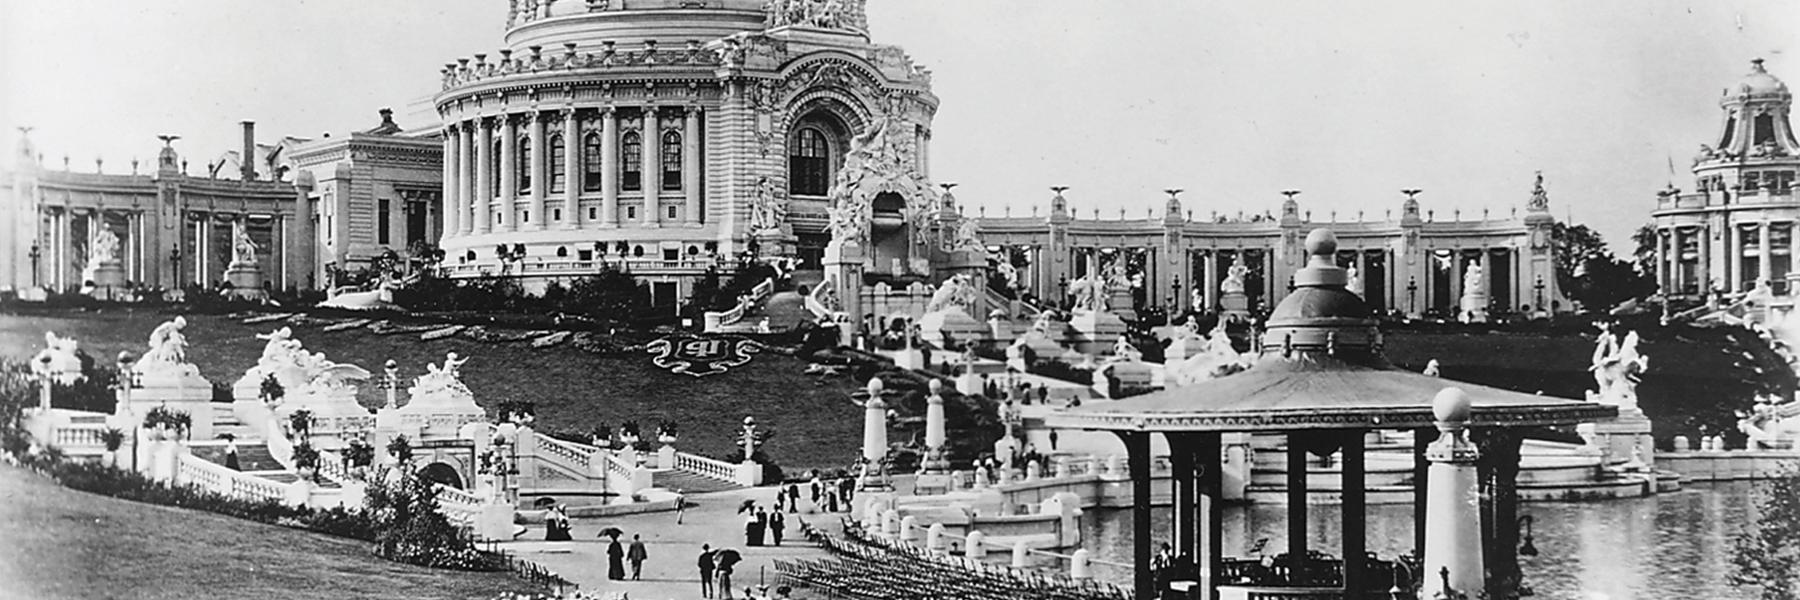 The 1904 World's Fair took place in 森林公园 in St. 路易.